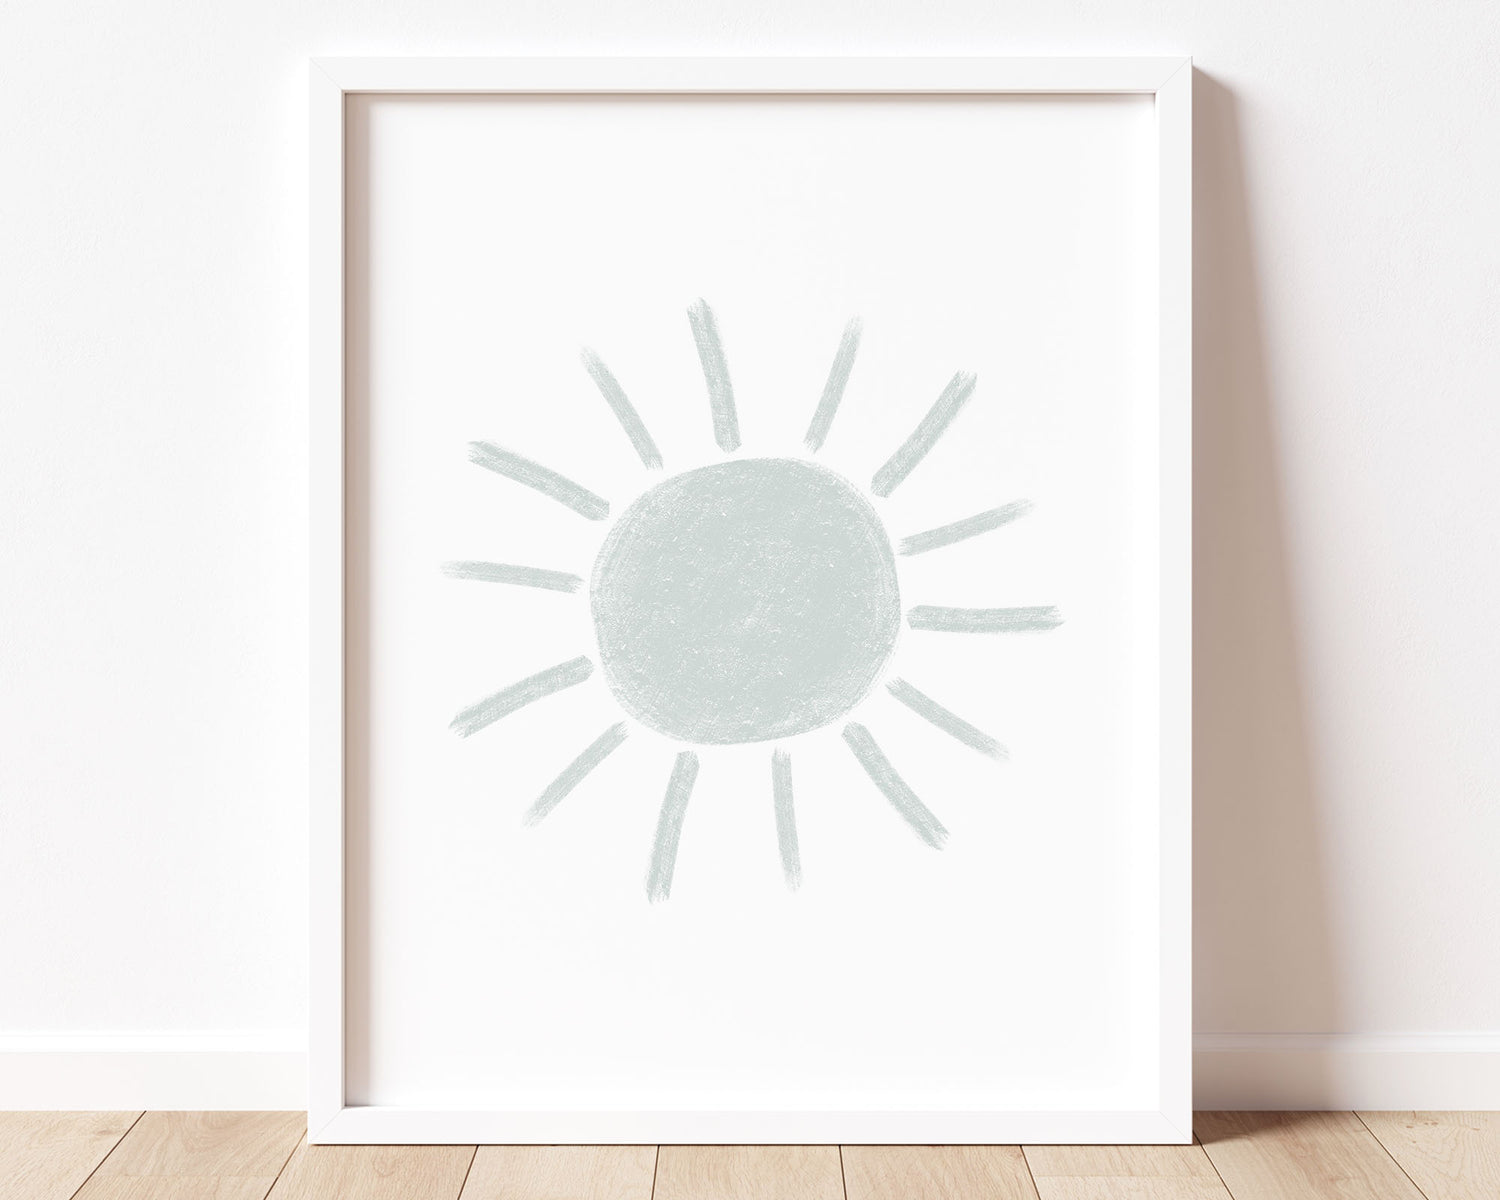 Muted pastel blue abstract sun in chalky brushstroke illlustration style perfect for Baby Nursery Décor, Little Boys Bedroom Wall Art, Toddler Girls Room Wall Hangings, Kiddos Bathroom Wall Art and Childrens Playroom Décor.